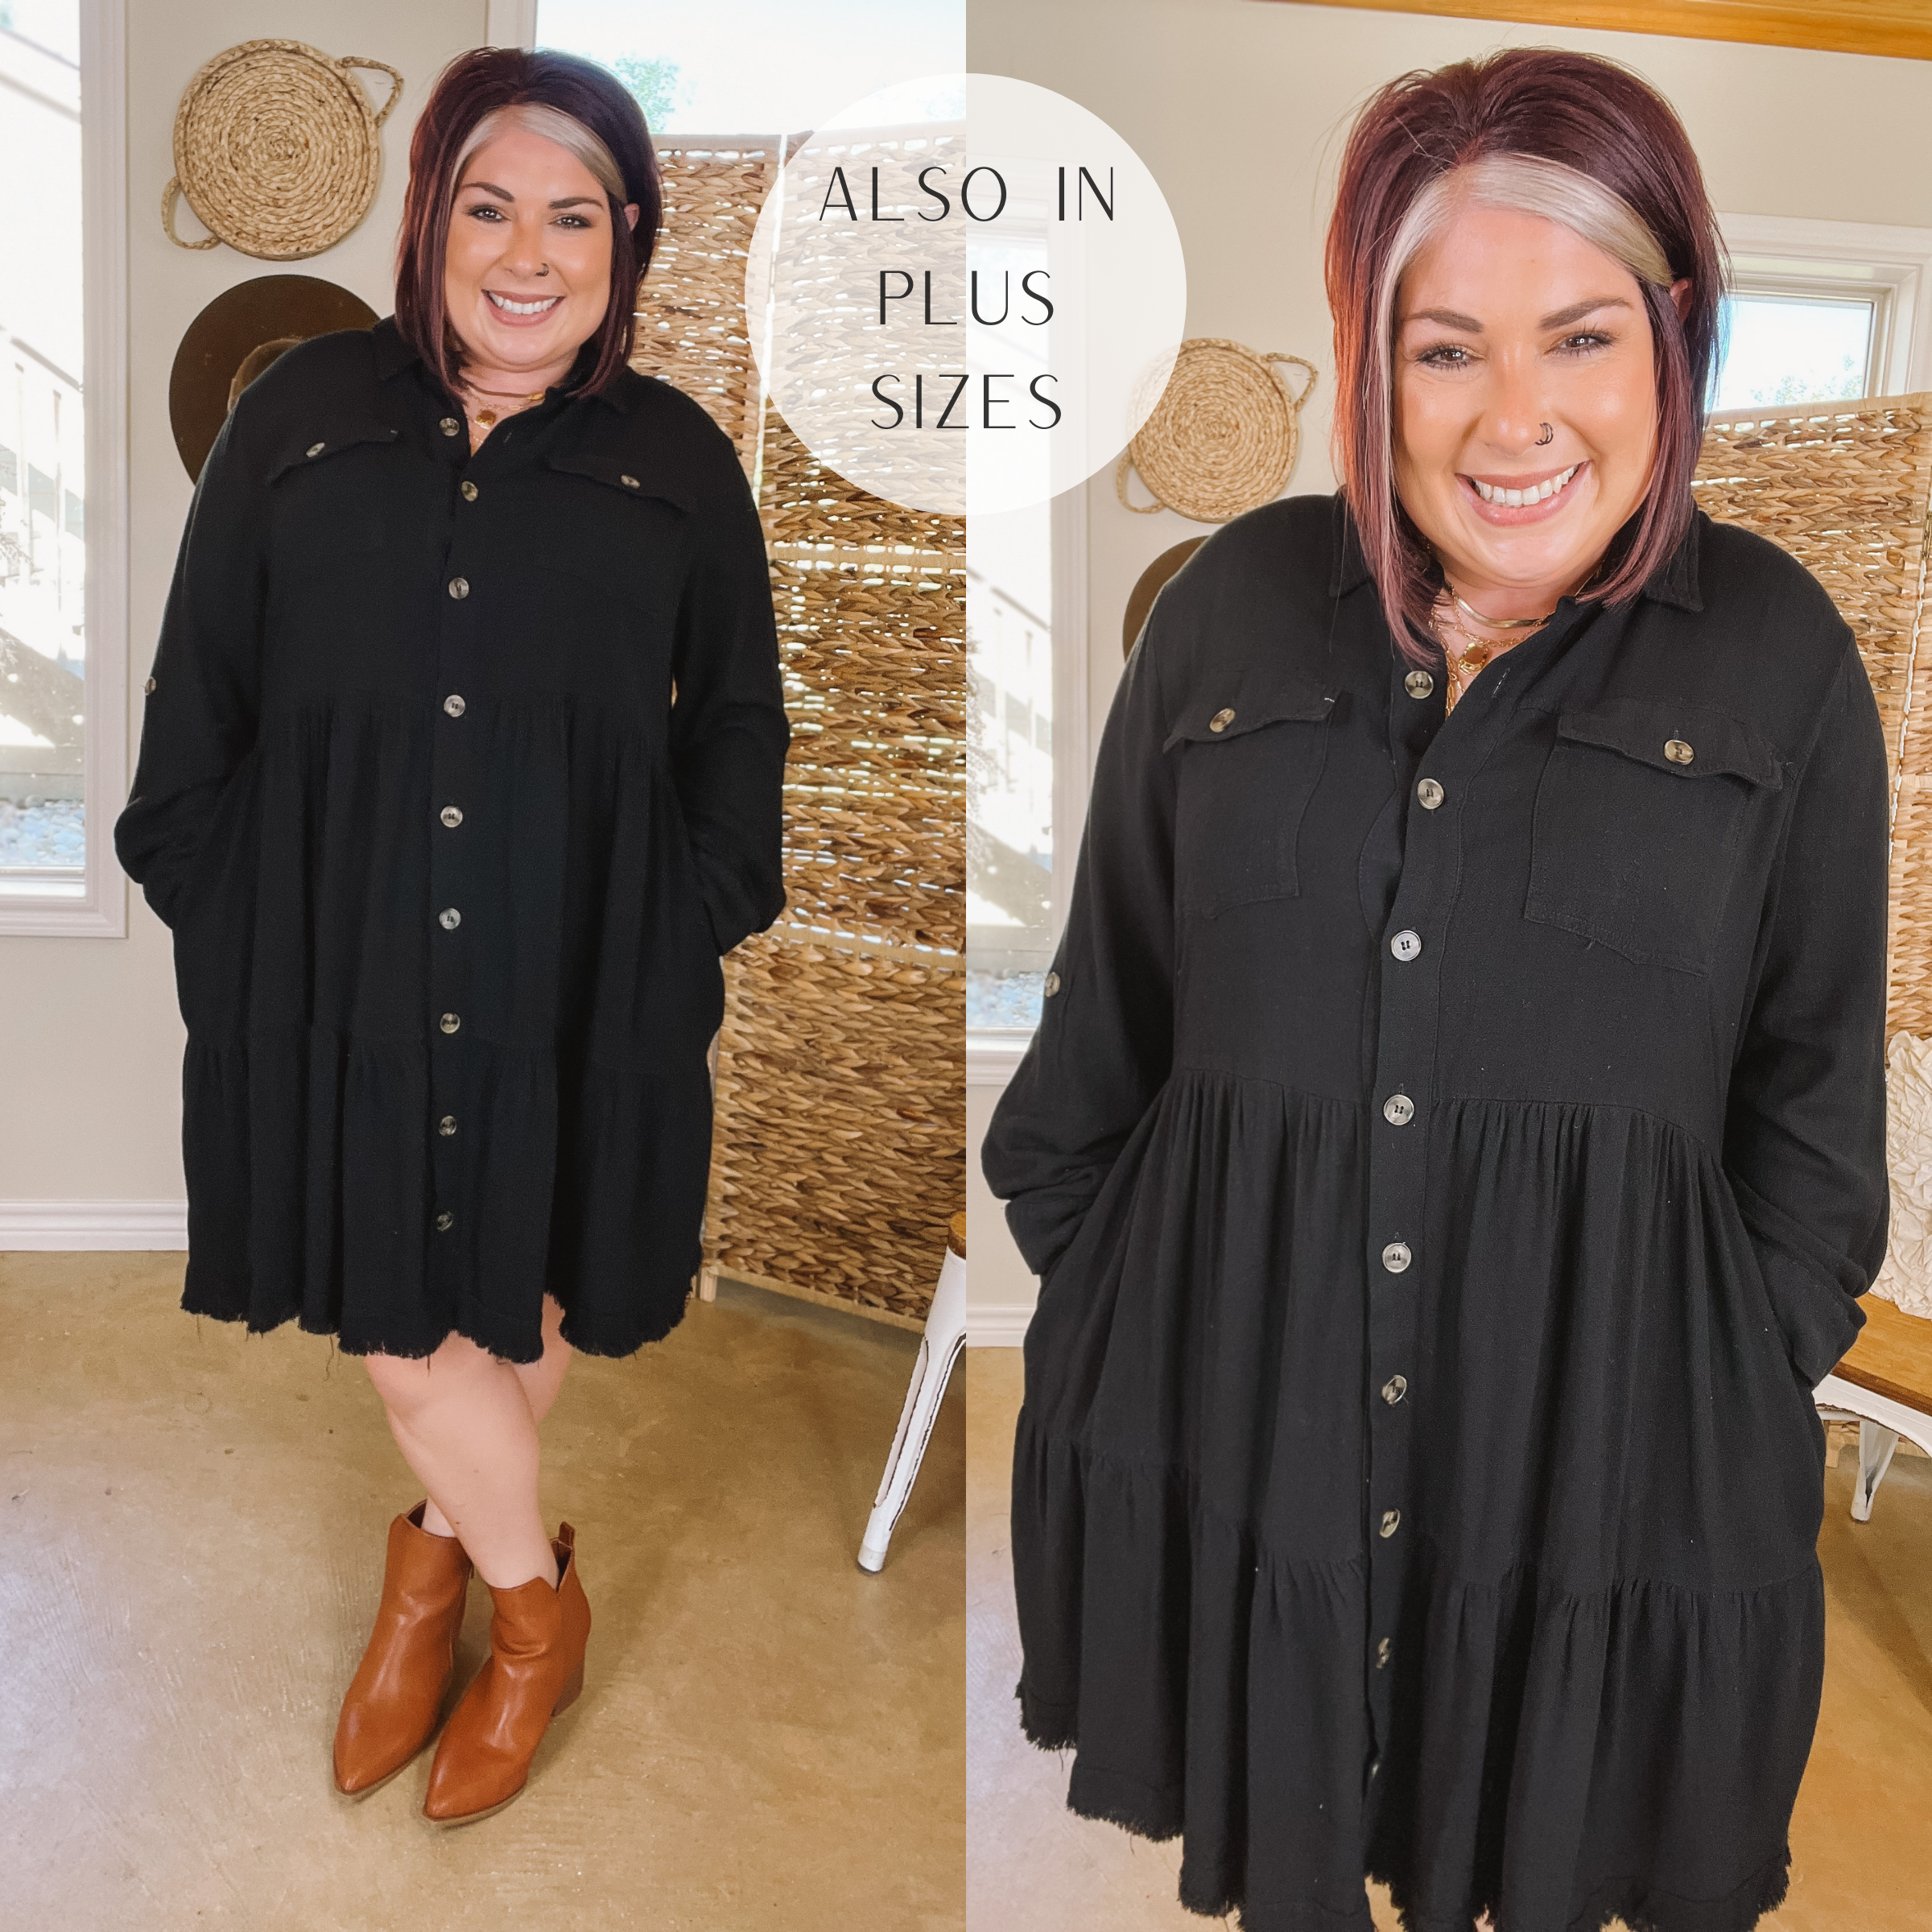 Chic Darling Ruffle Tiered Button Up Dress with Long Sleeves in Black - Giddy Up Glamour Boutique